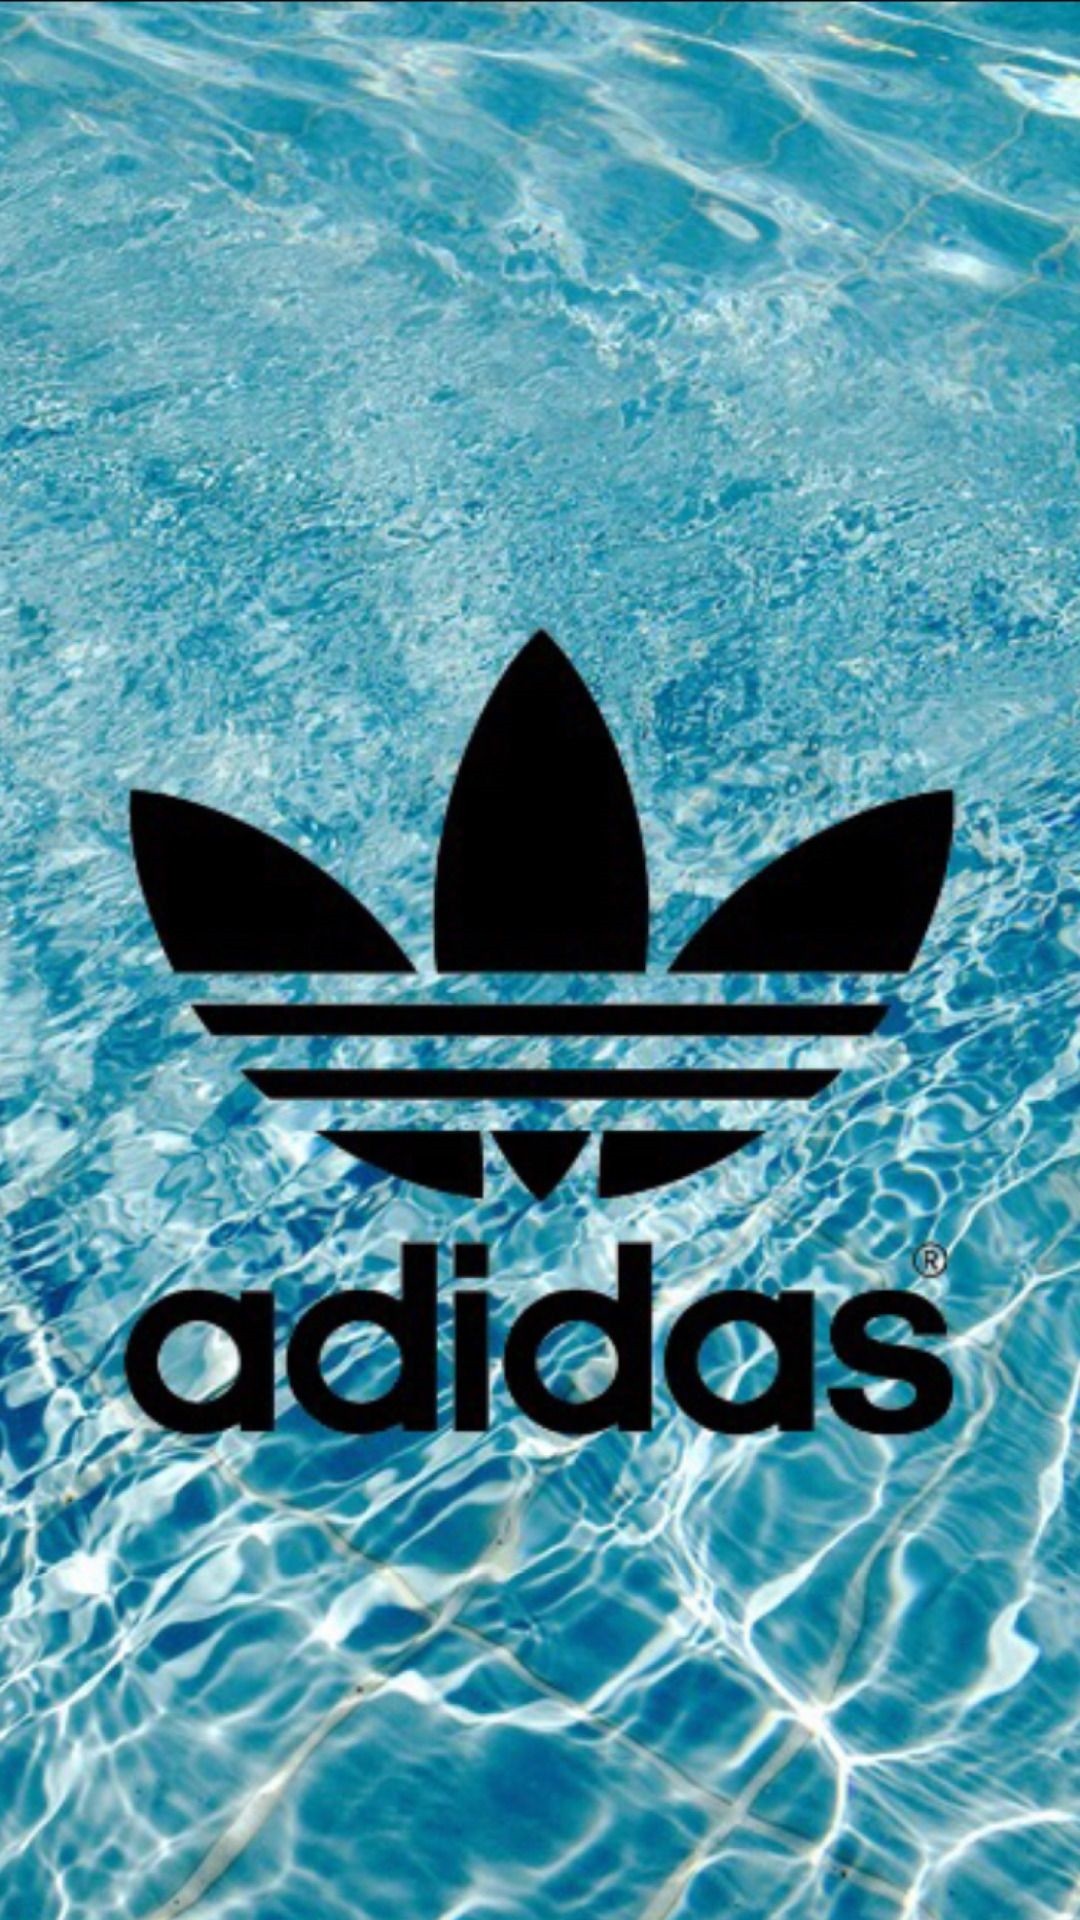 Black Adidas wallpaper for android